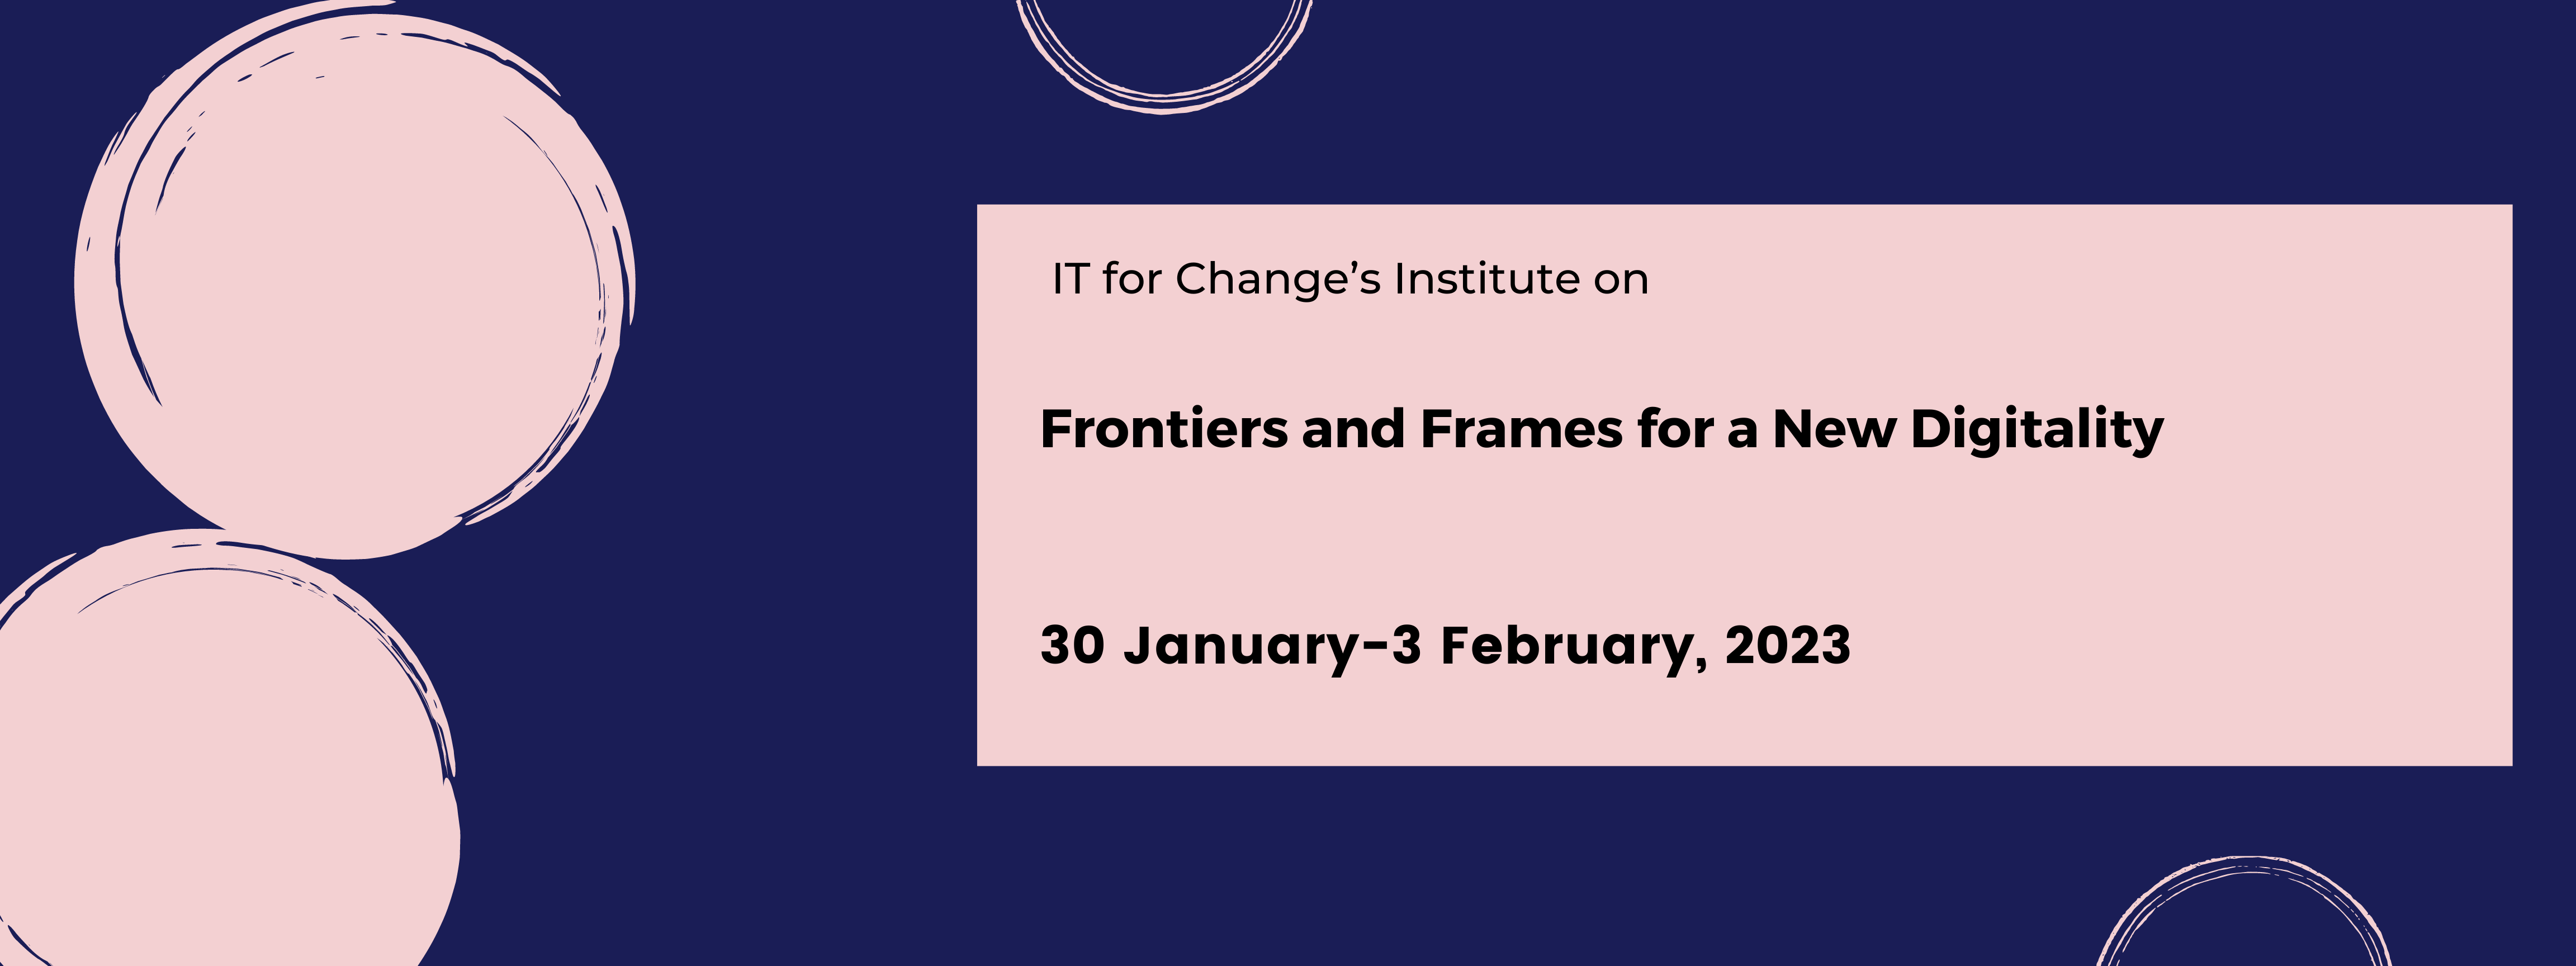 Institute on Frontiers and Frames for a New Digitality